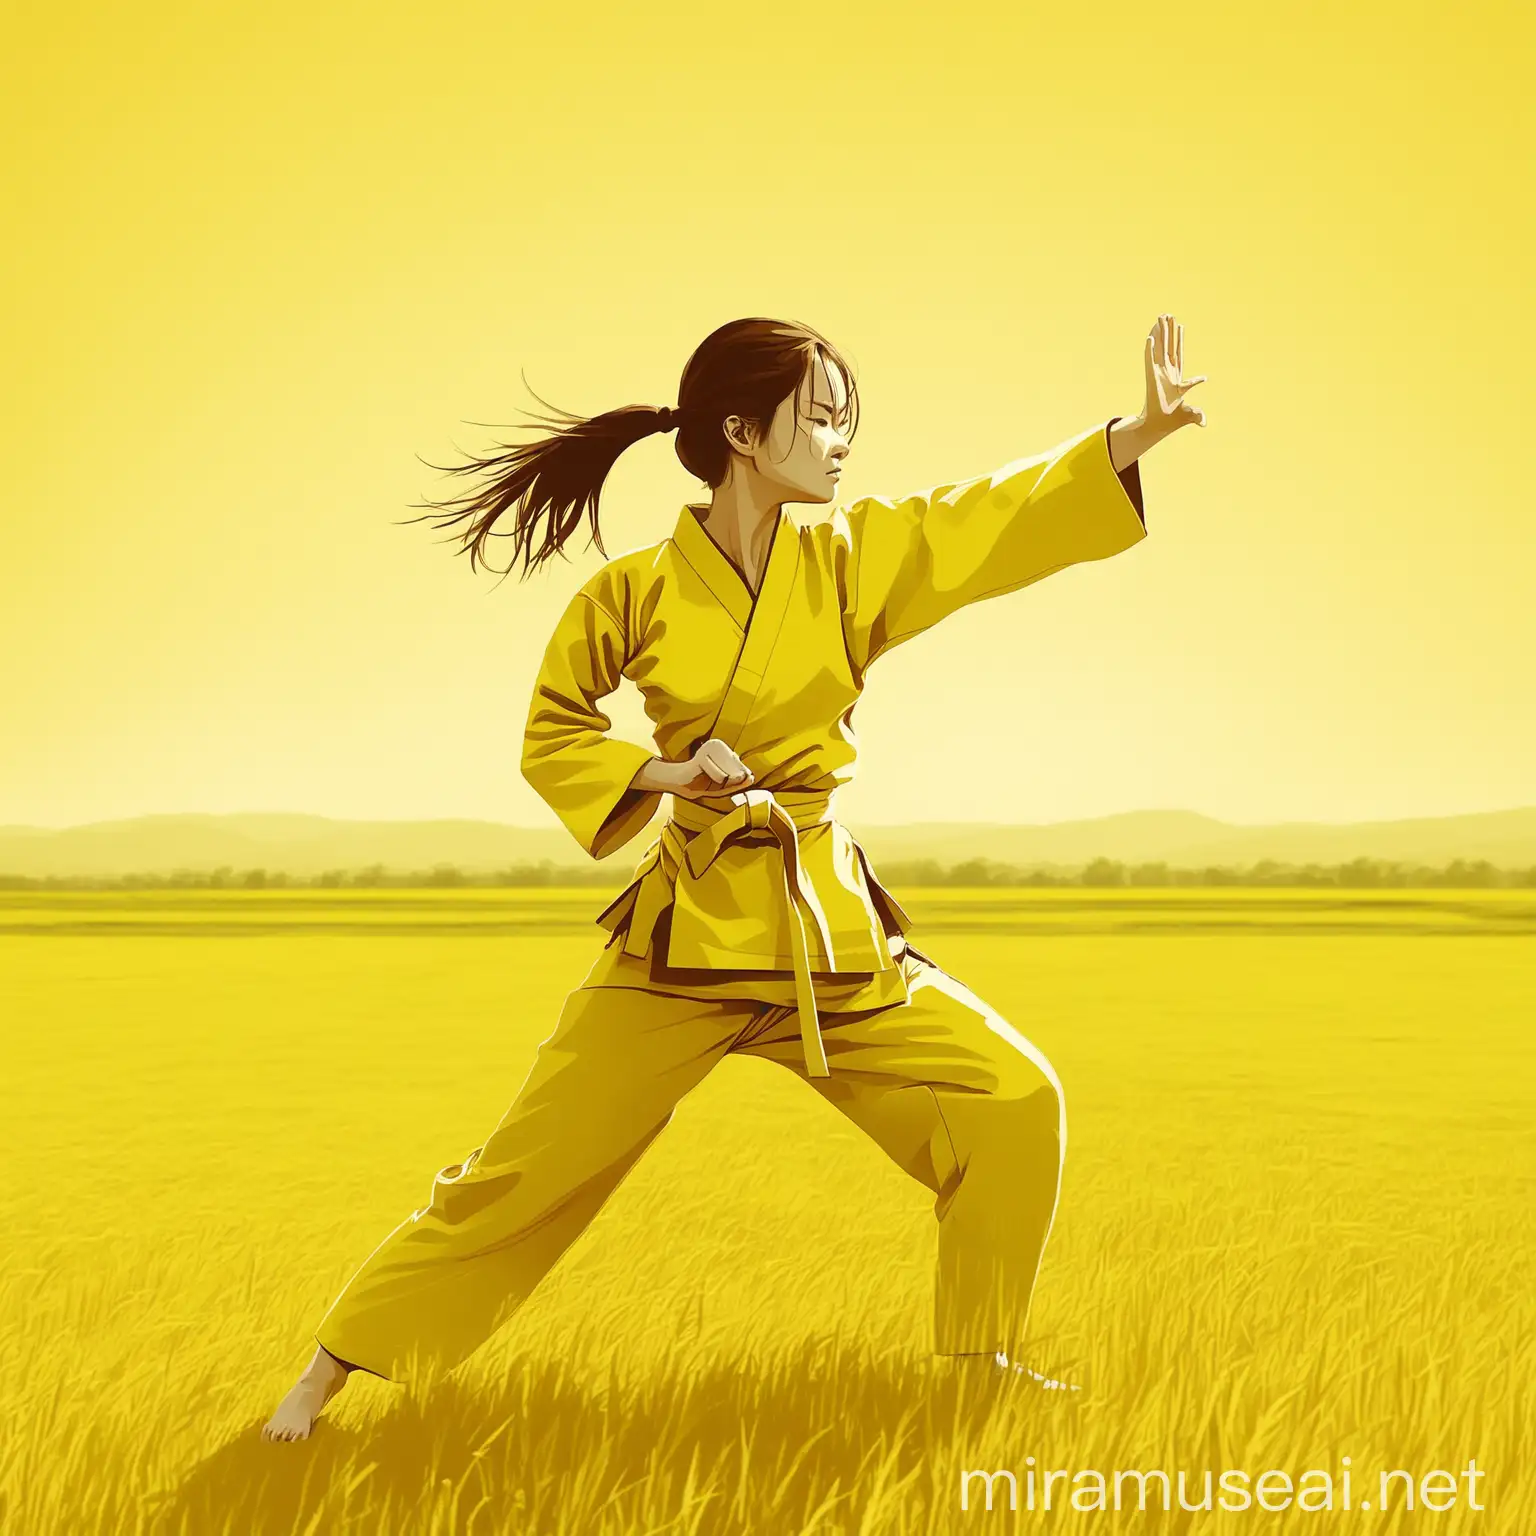 woman doing karate in field. yellow color theme.